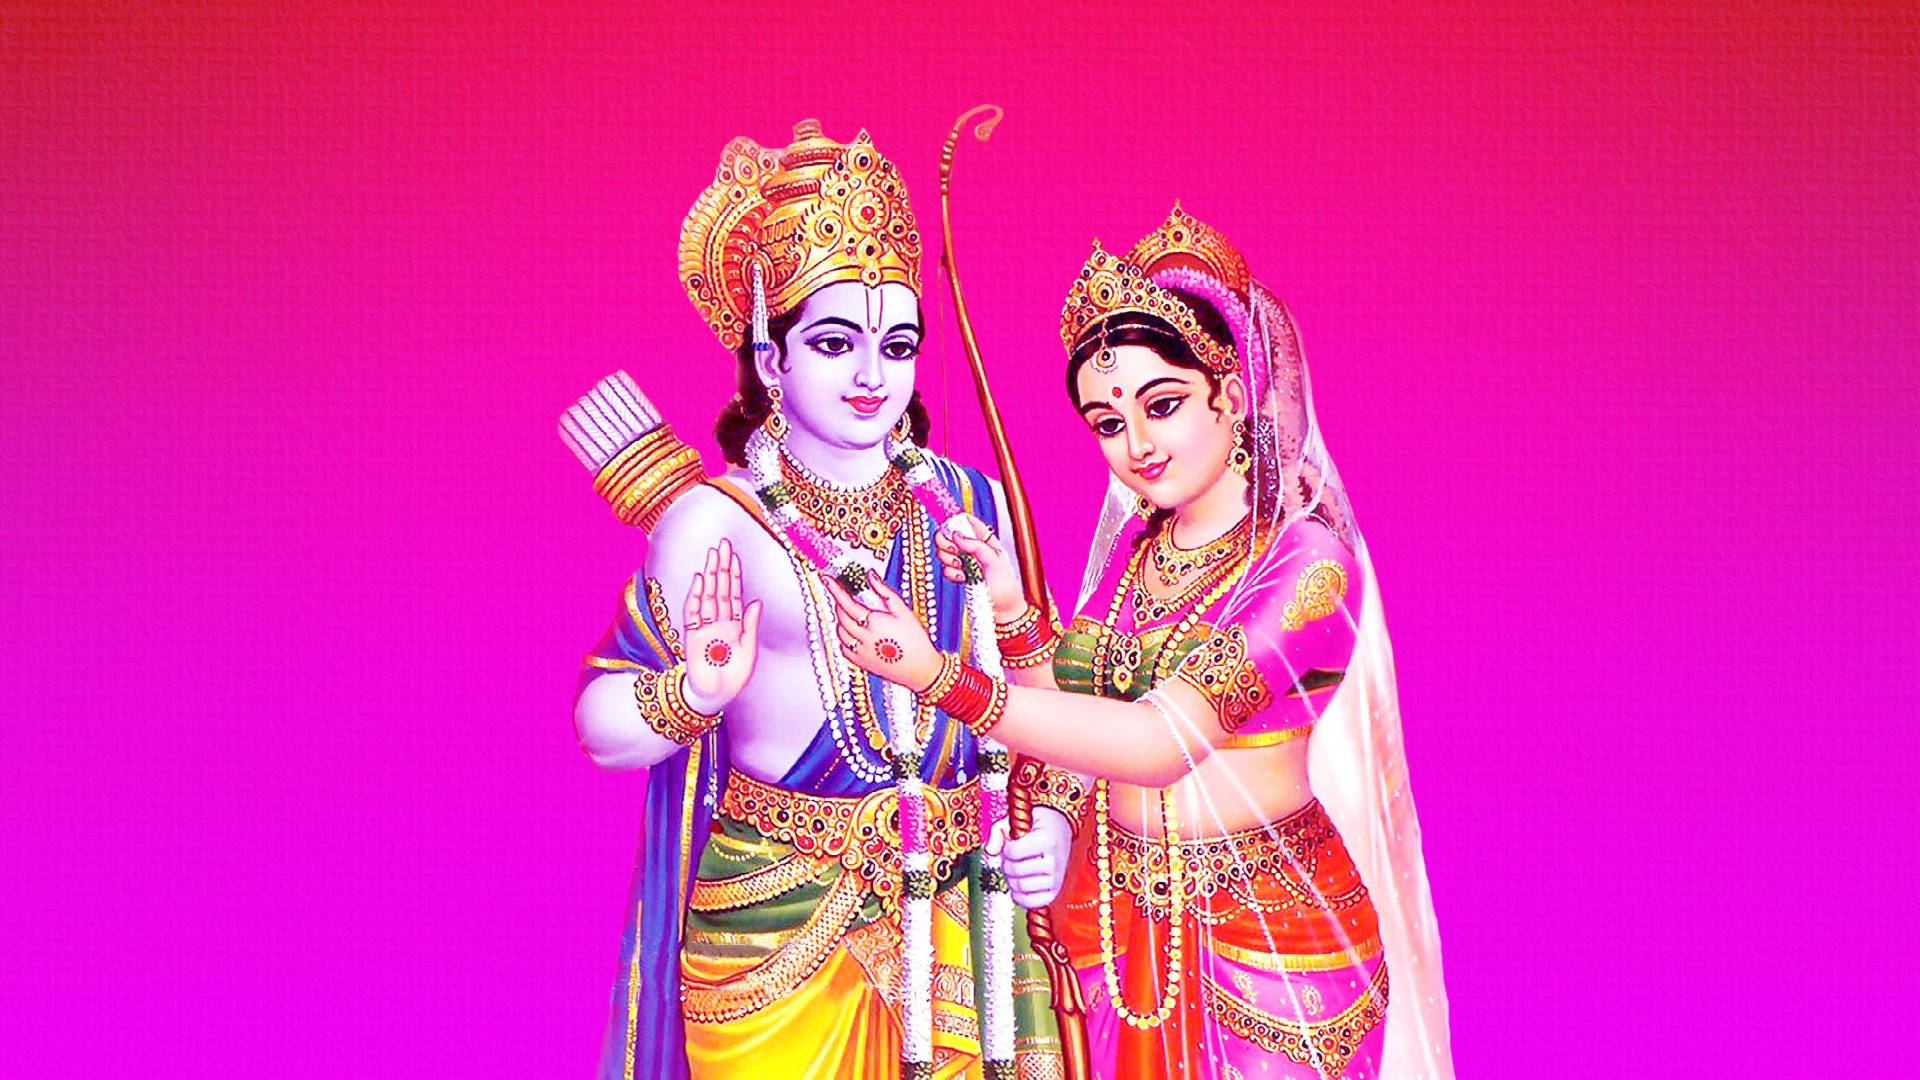 Majestic Lord Rama With Bow And Arrow Wallpaper